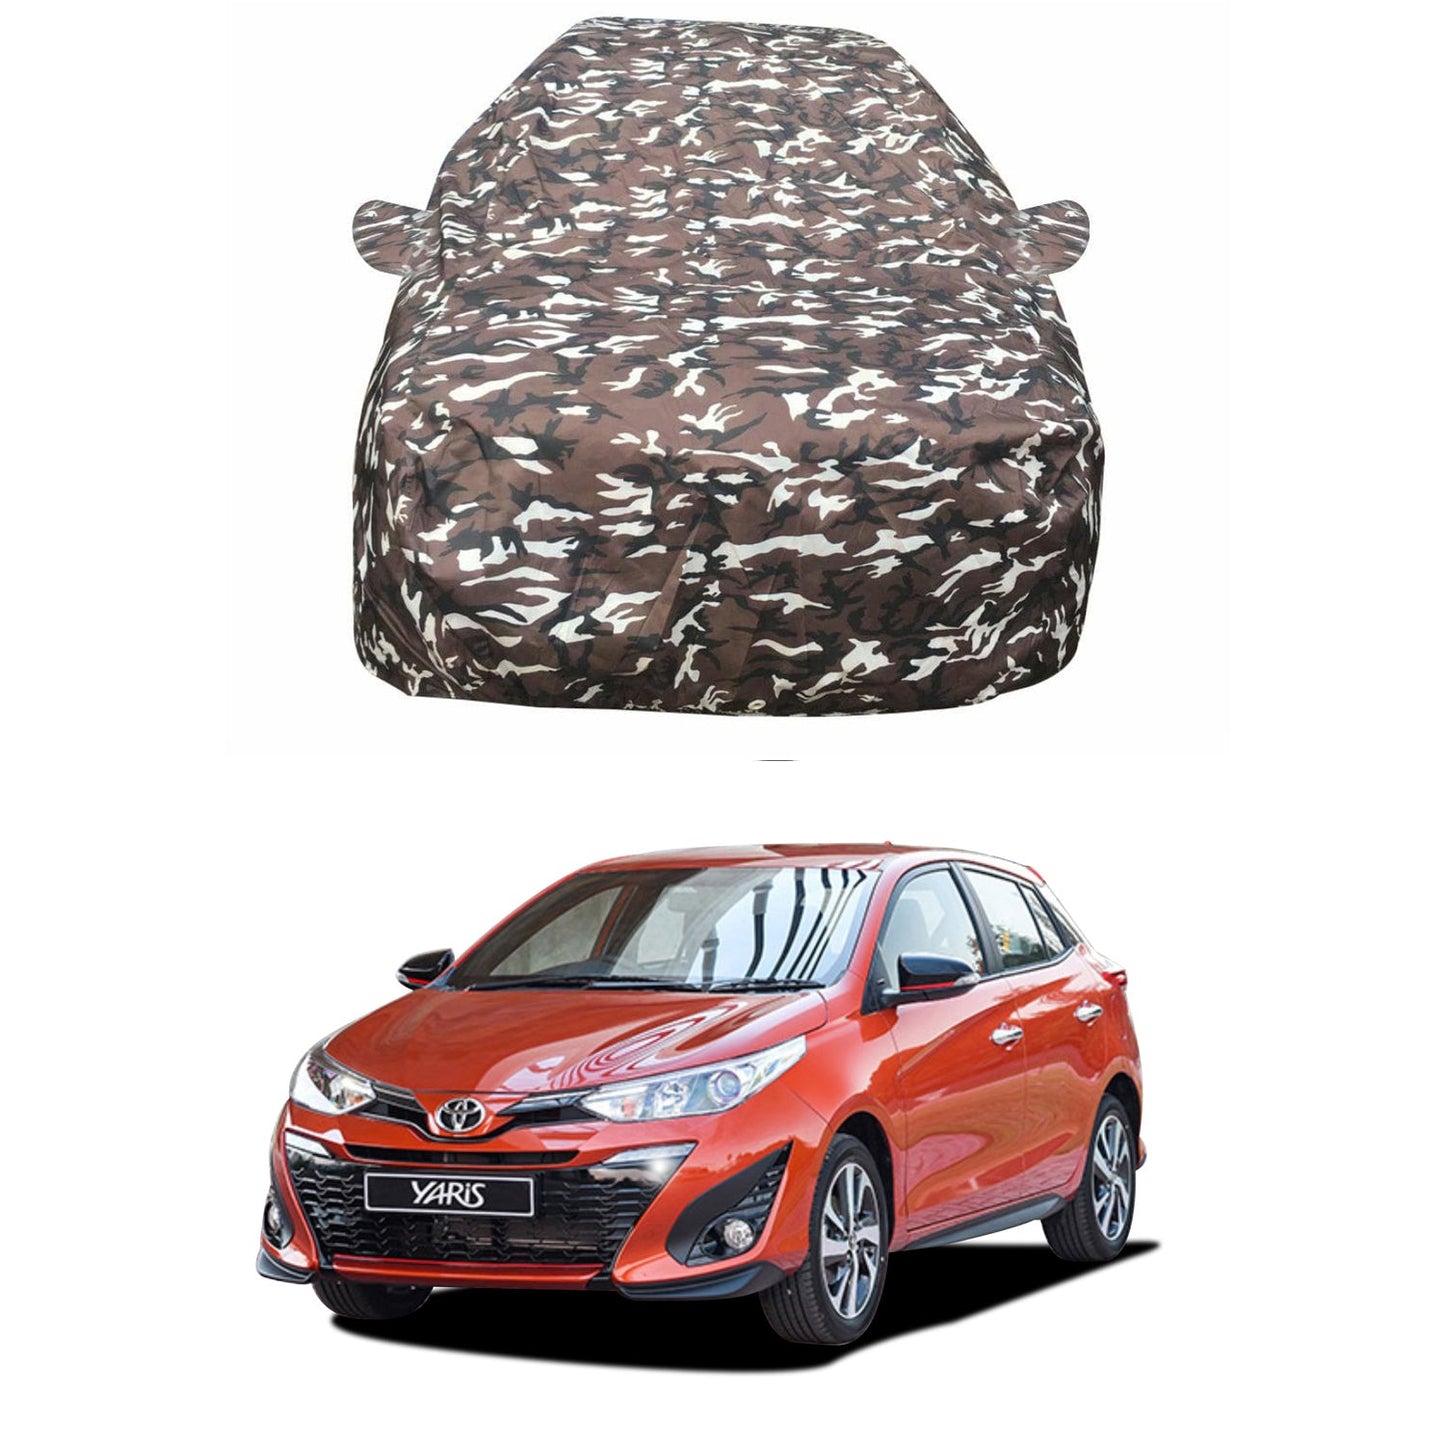 Oshotto Ranger Design Made of 100% Waterproof Fabric Car Body Cover with Mirror Pockets For Toyota Yaris